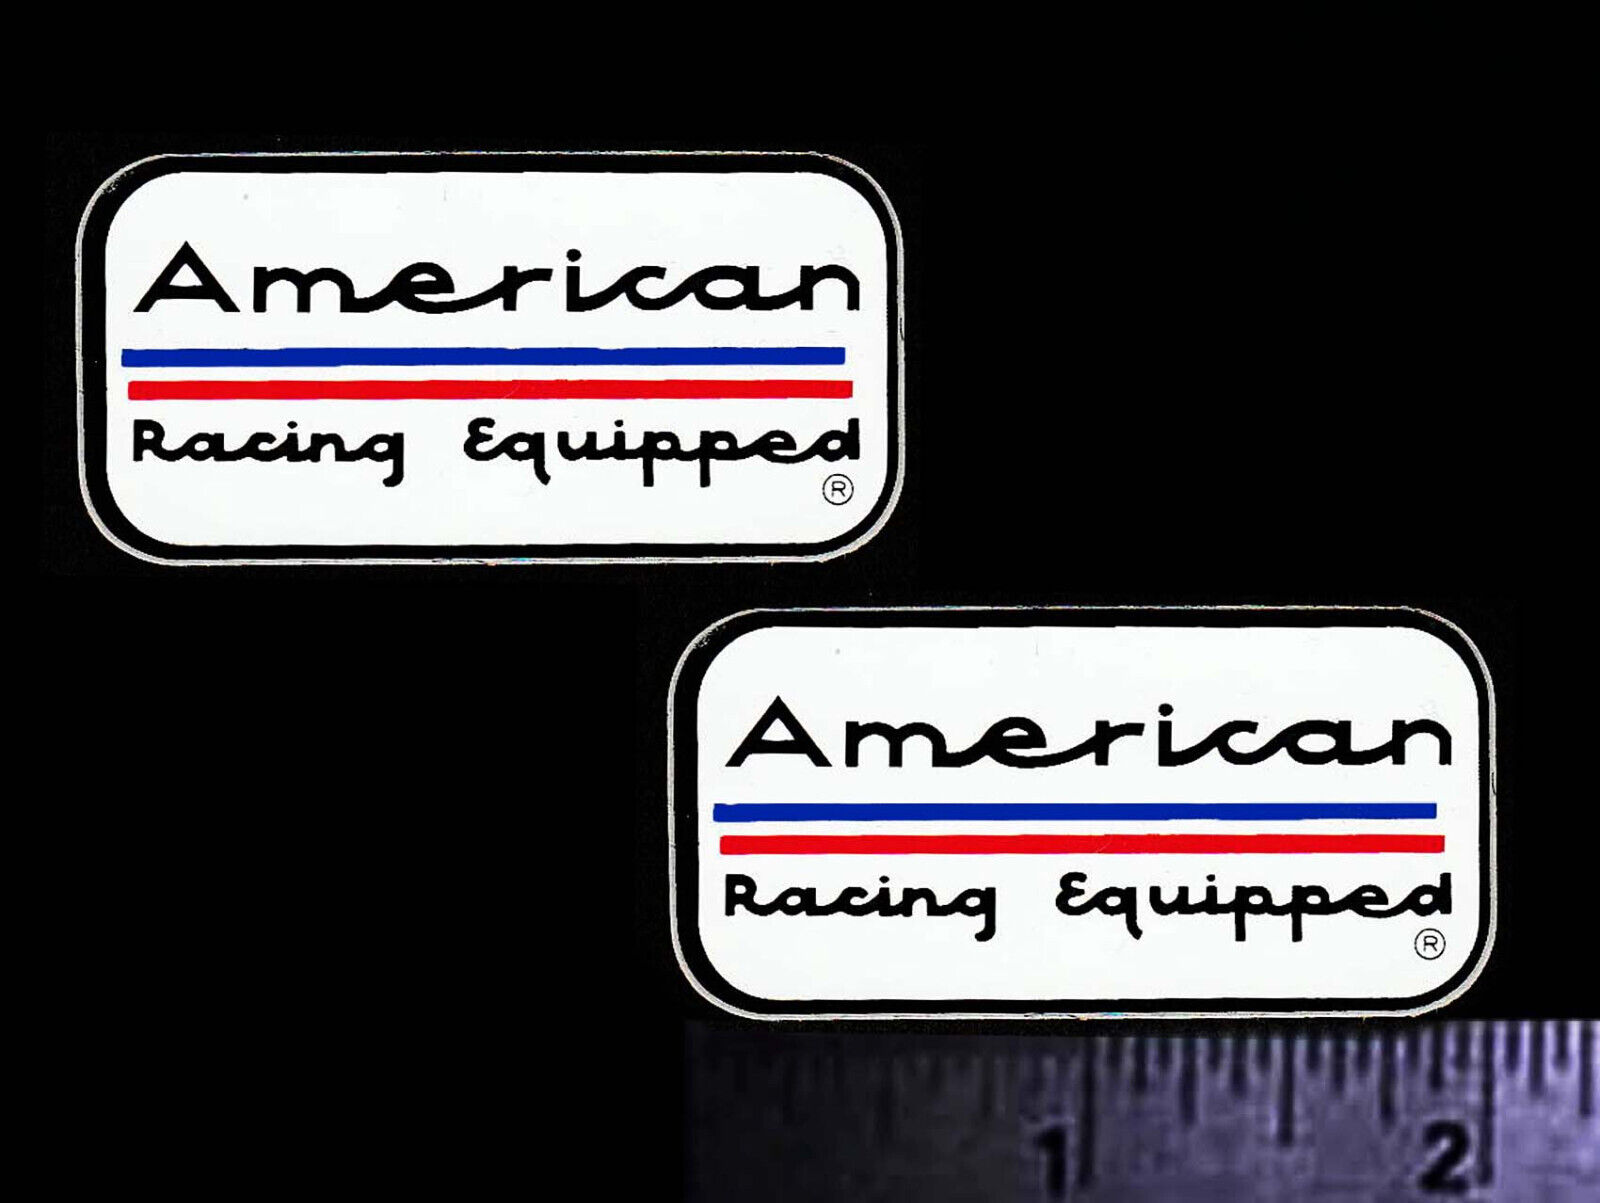 AMERICAN Racing Equippped - Set of 2 Original Vintage 60\'s 70\'s Decals/Stickers